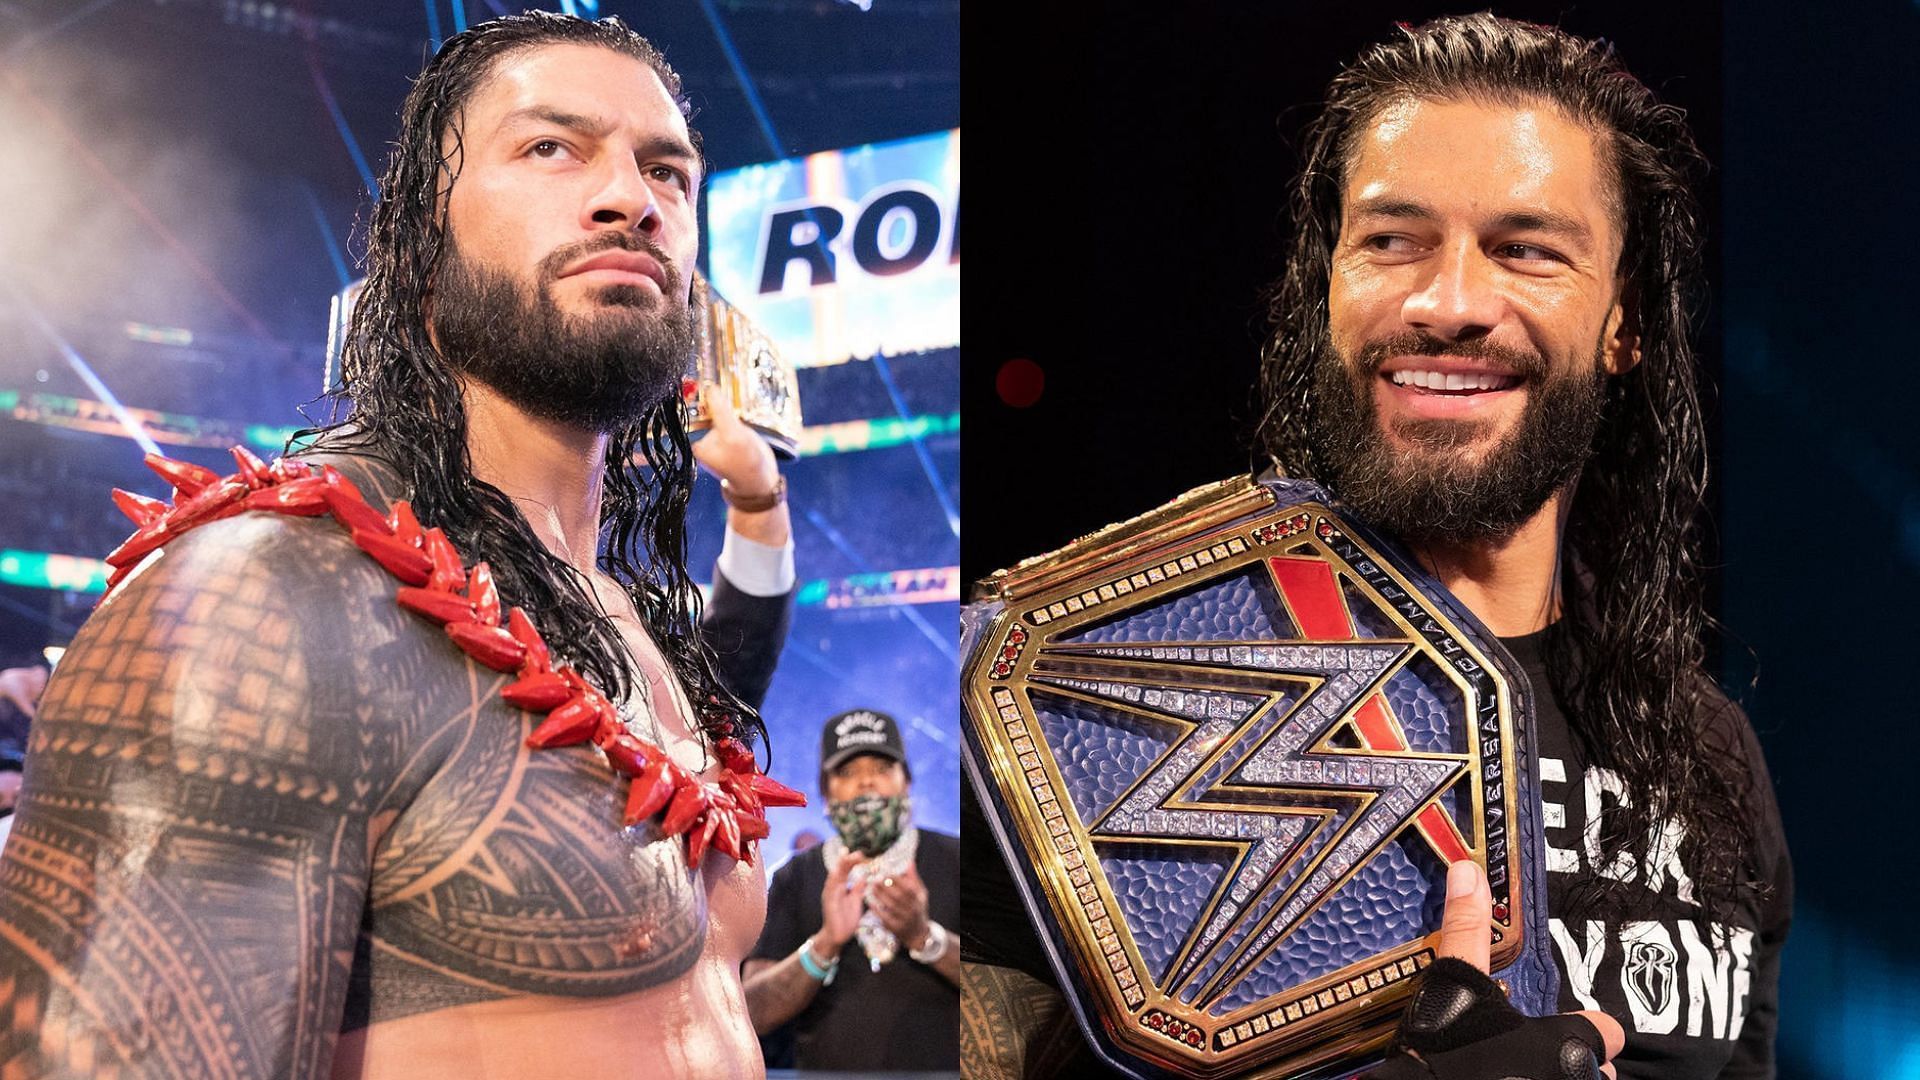 Reigns will appear tonight on SmackDown.